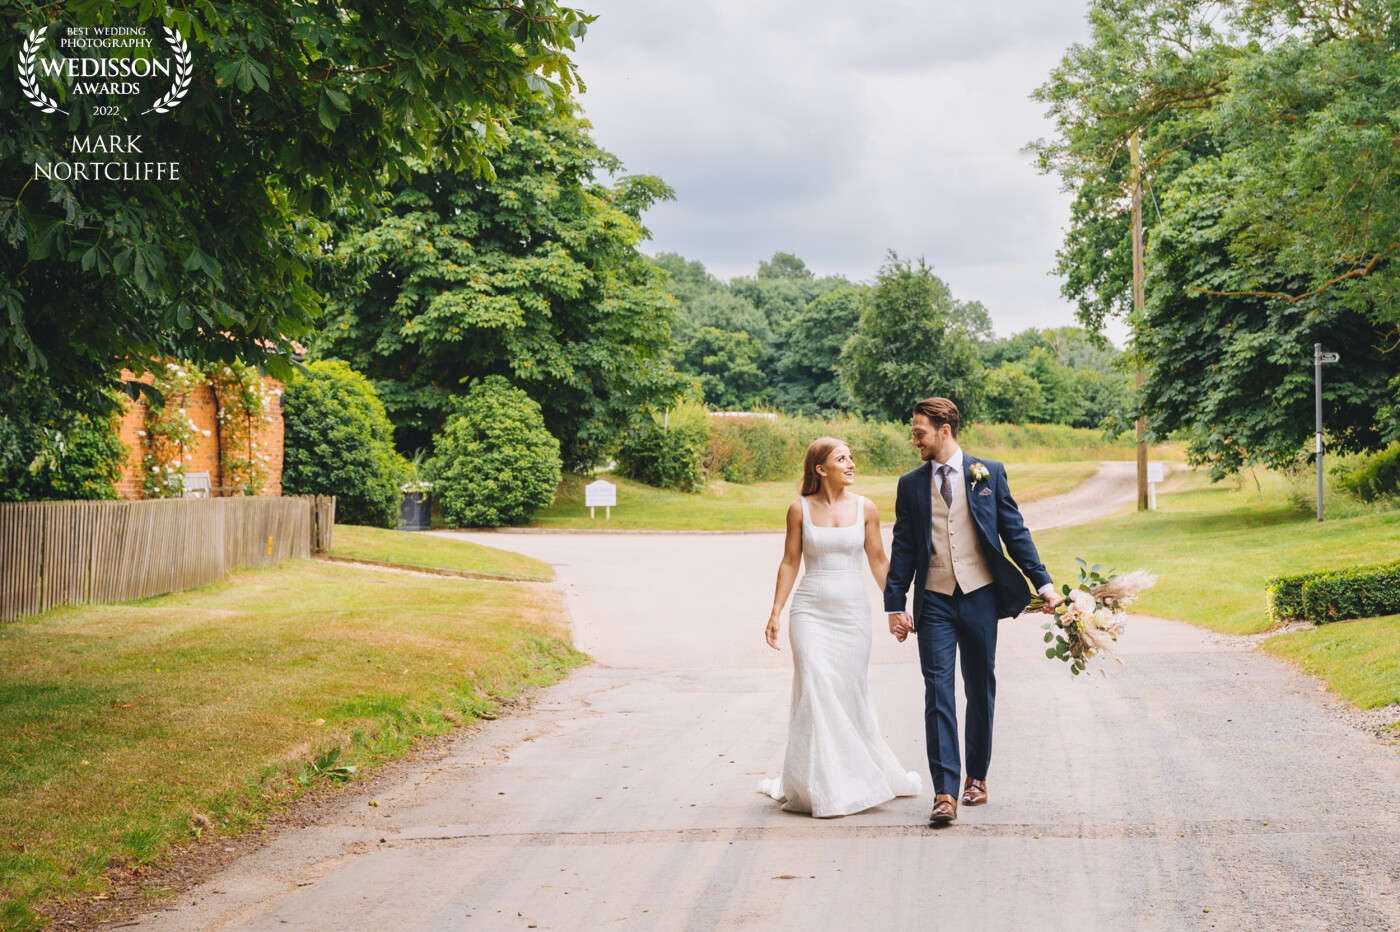 Sam & James got married at the amazing Granary Estates in Newmarket Cambridgeshire on a glorious early summer day. I love the fact James is offering to carry the bouquet. A simple semi candid moment with a couple lost in their own space.